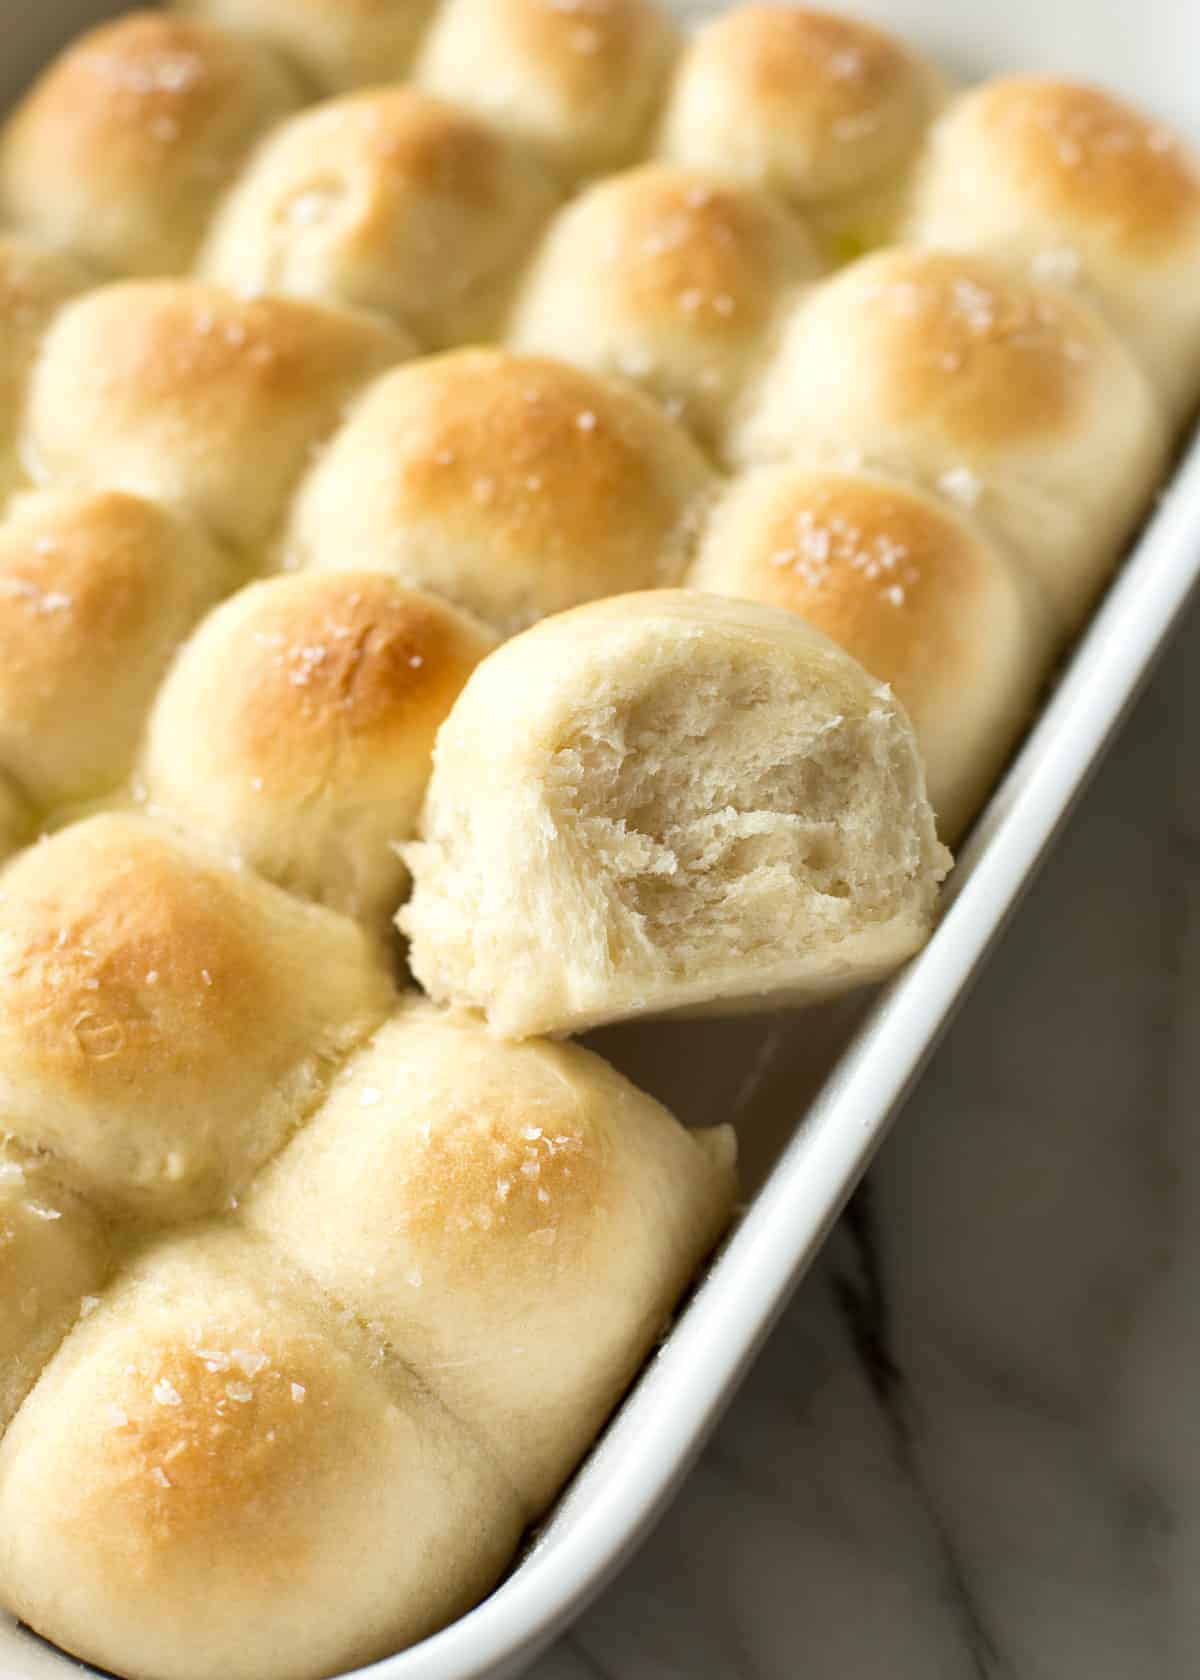 pulling a roll out of a white baking dish full of rolls